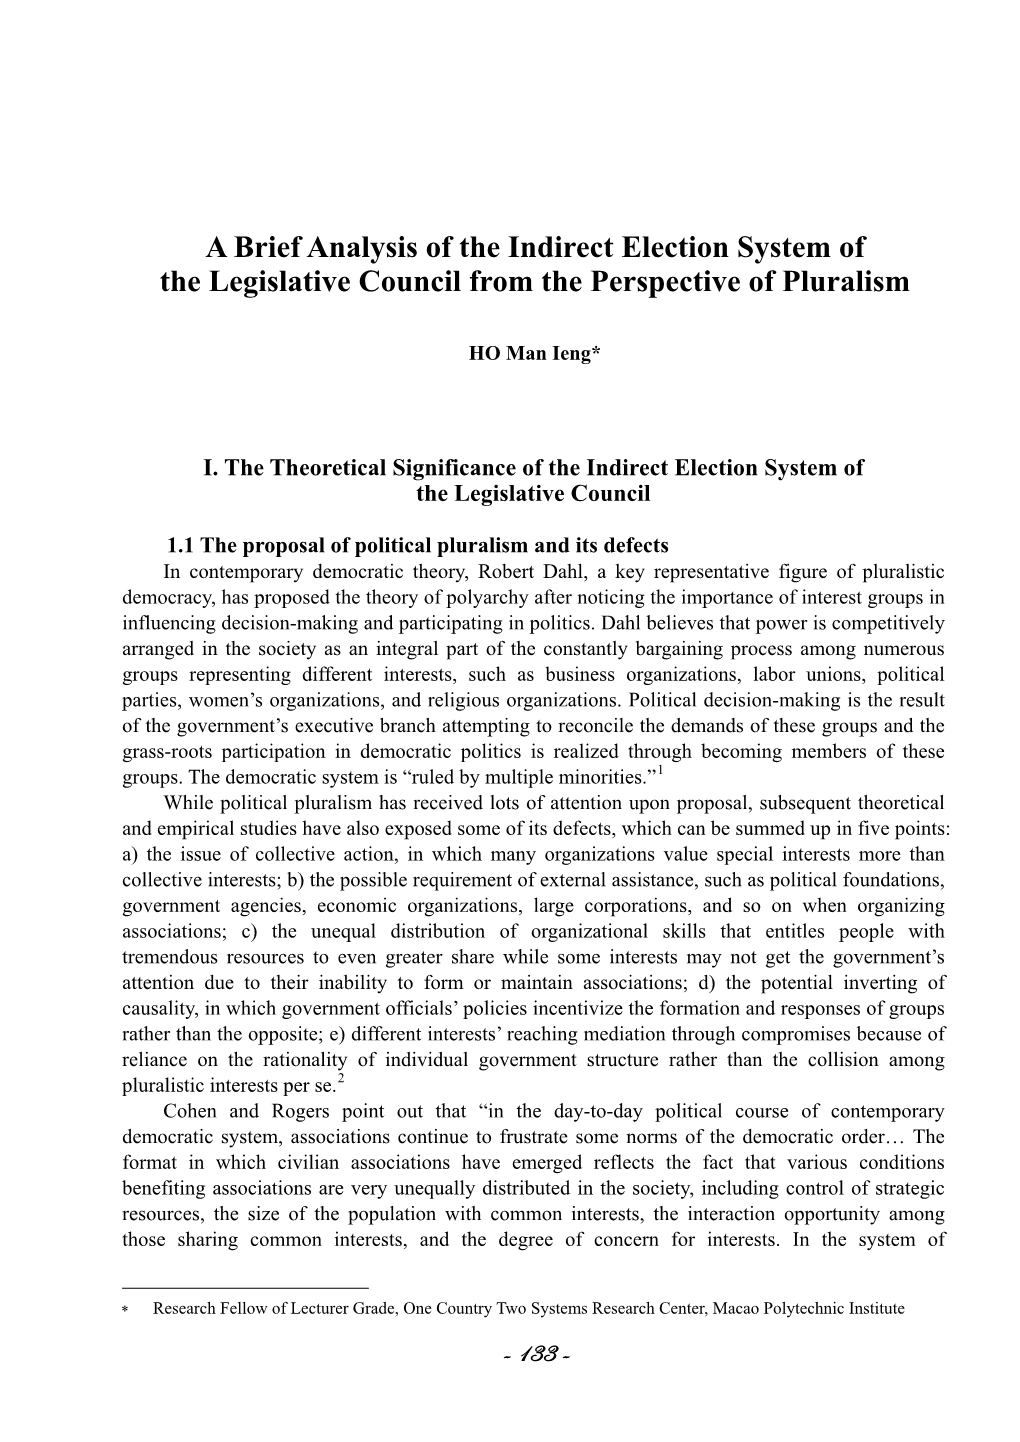 A Brief Analysis of the Indirect Election System of the Legislative Council from the Perspective of Pluralism